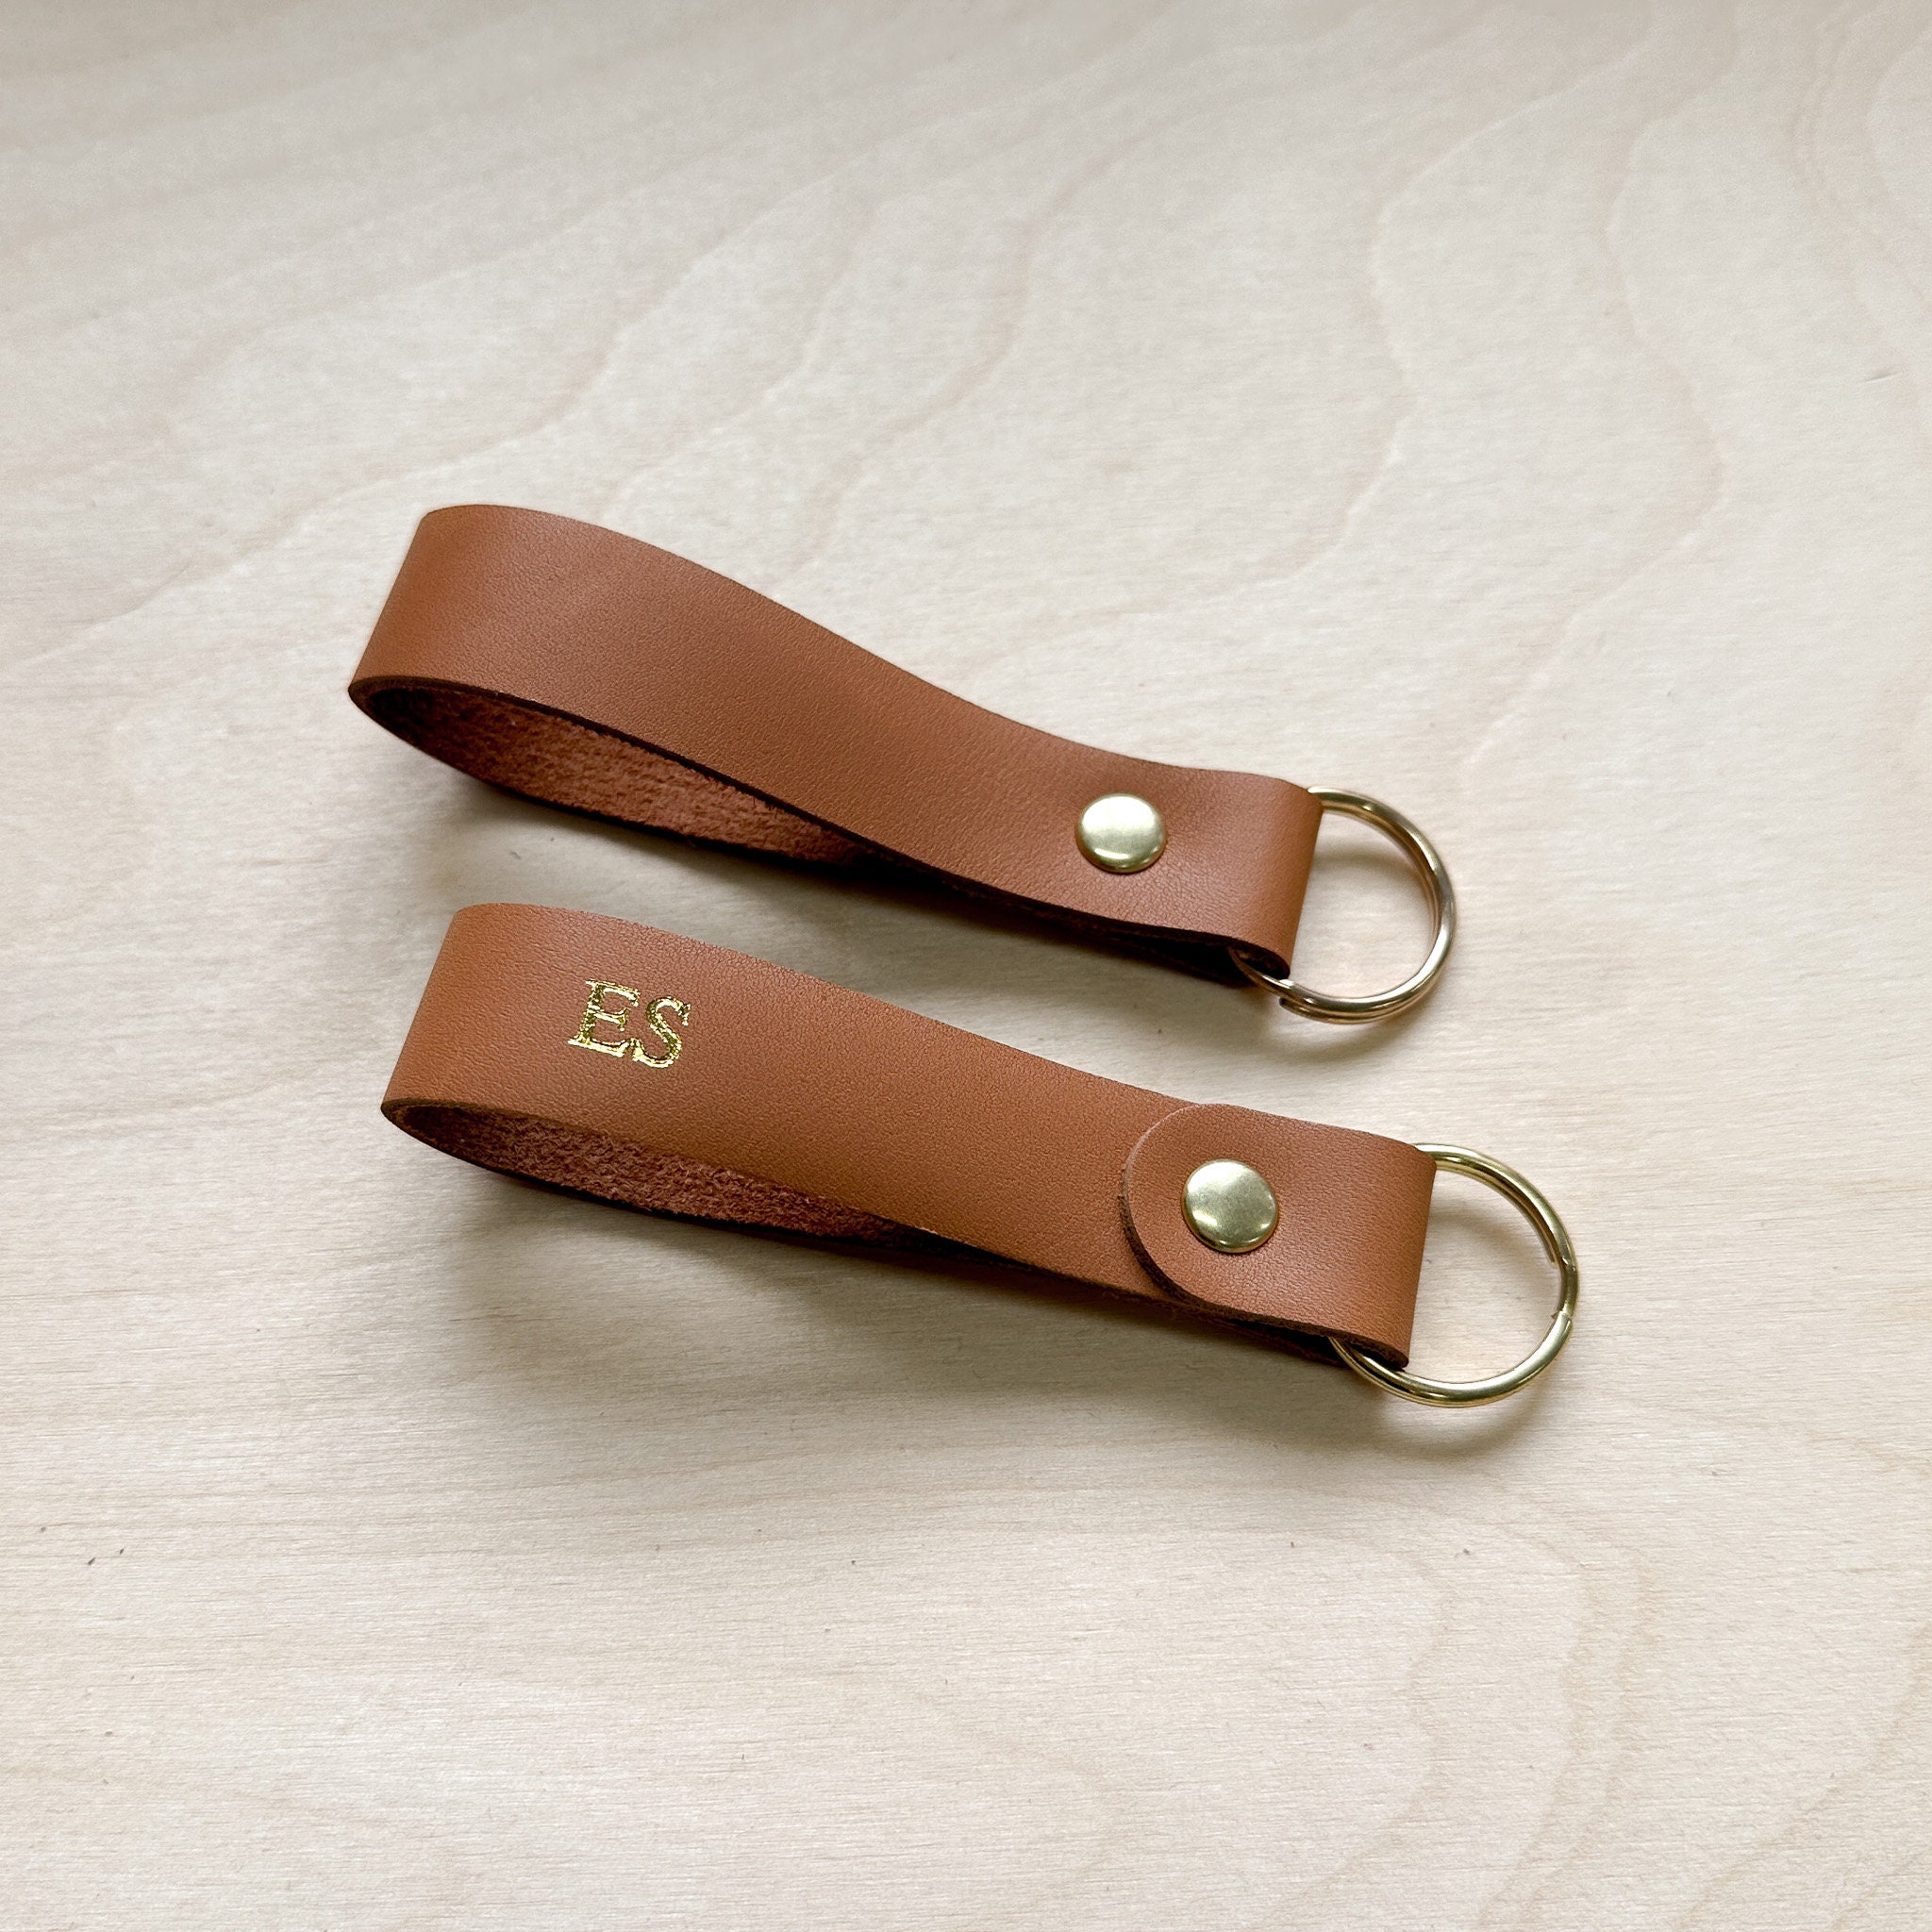 Tan Brown Leather Looped Keyring, Personalised Veg Key Ring, New Home Gift Perfect For House Keys